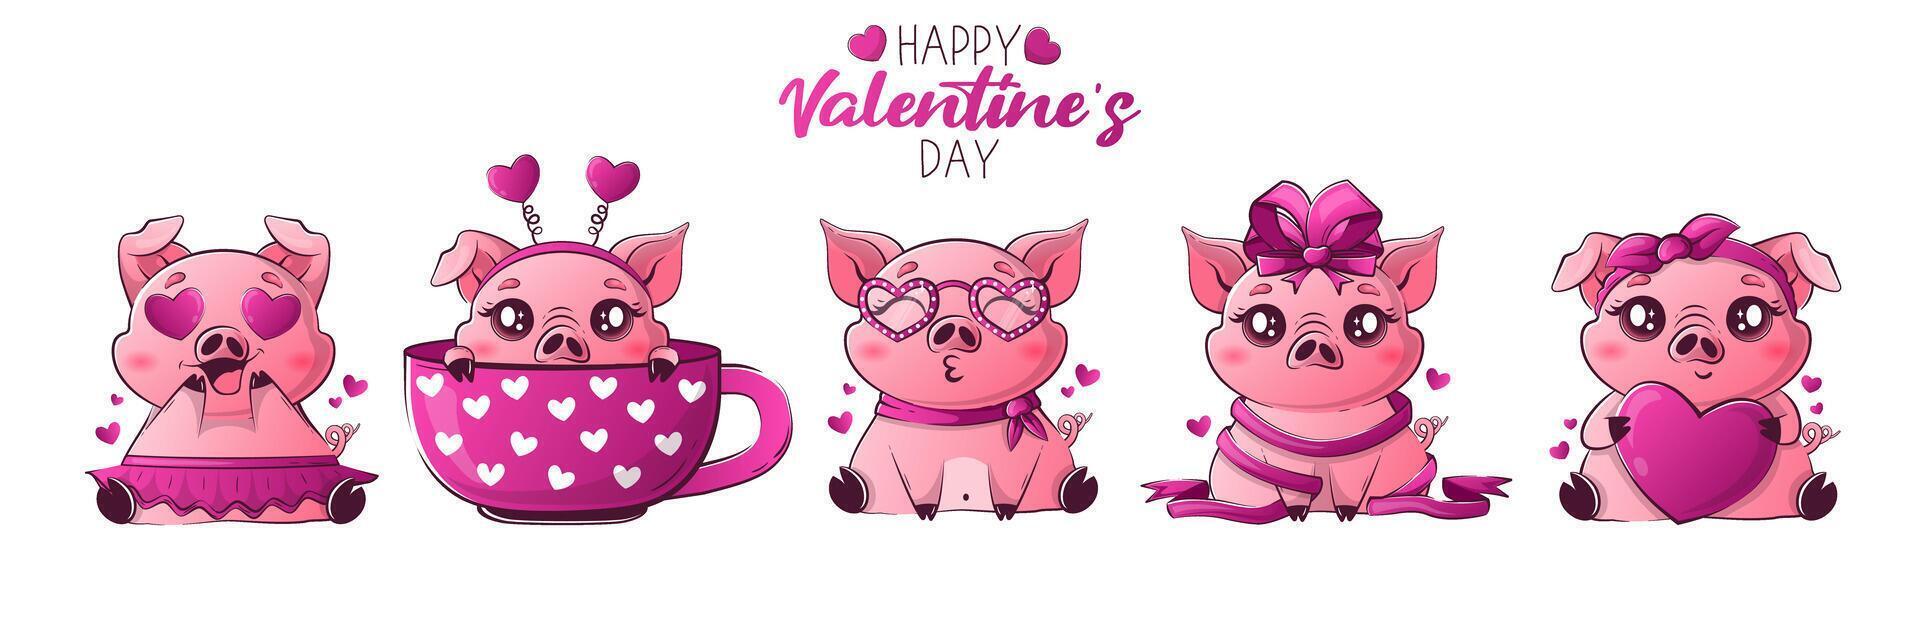 Greeting long web banner with kawaii love pigs for Valentine's day. Simple valentines character happy farm animal vector